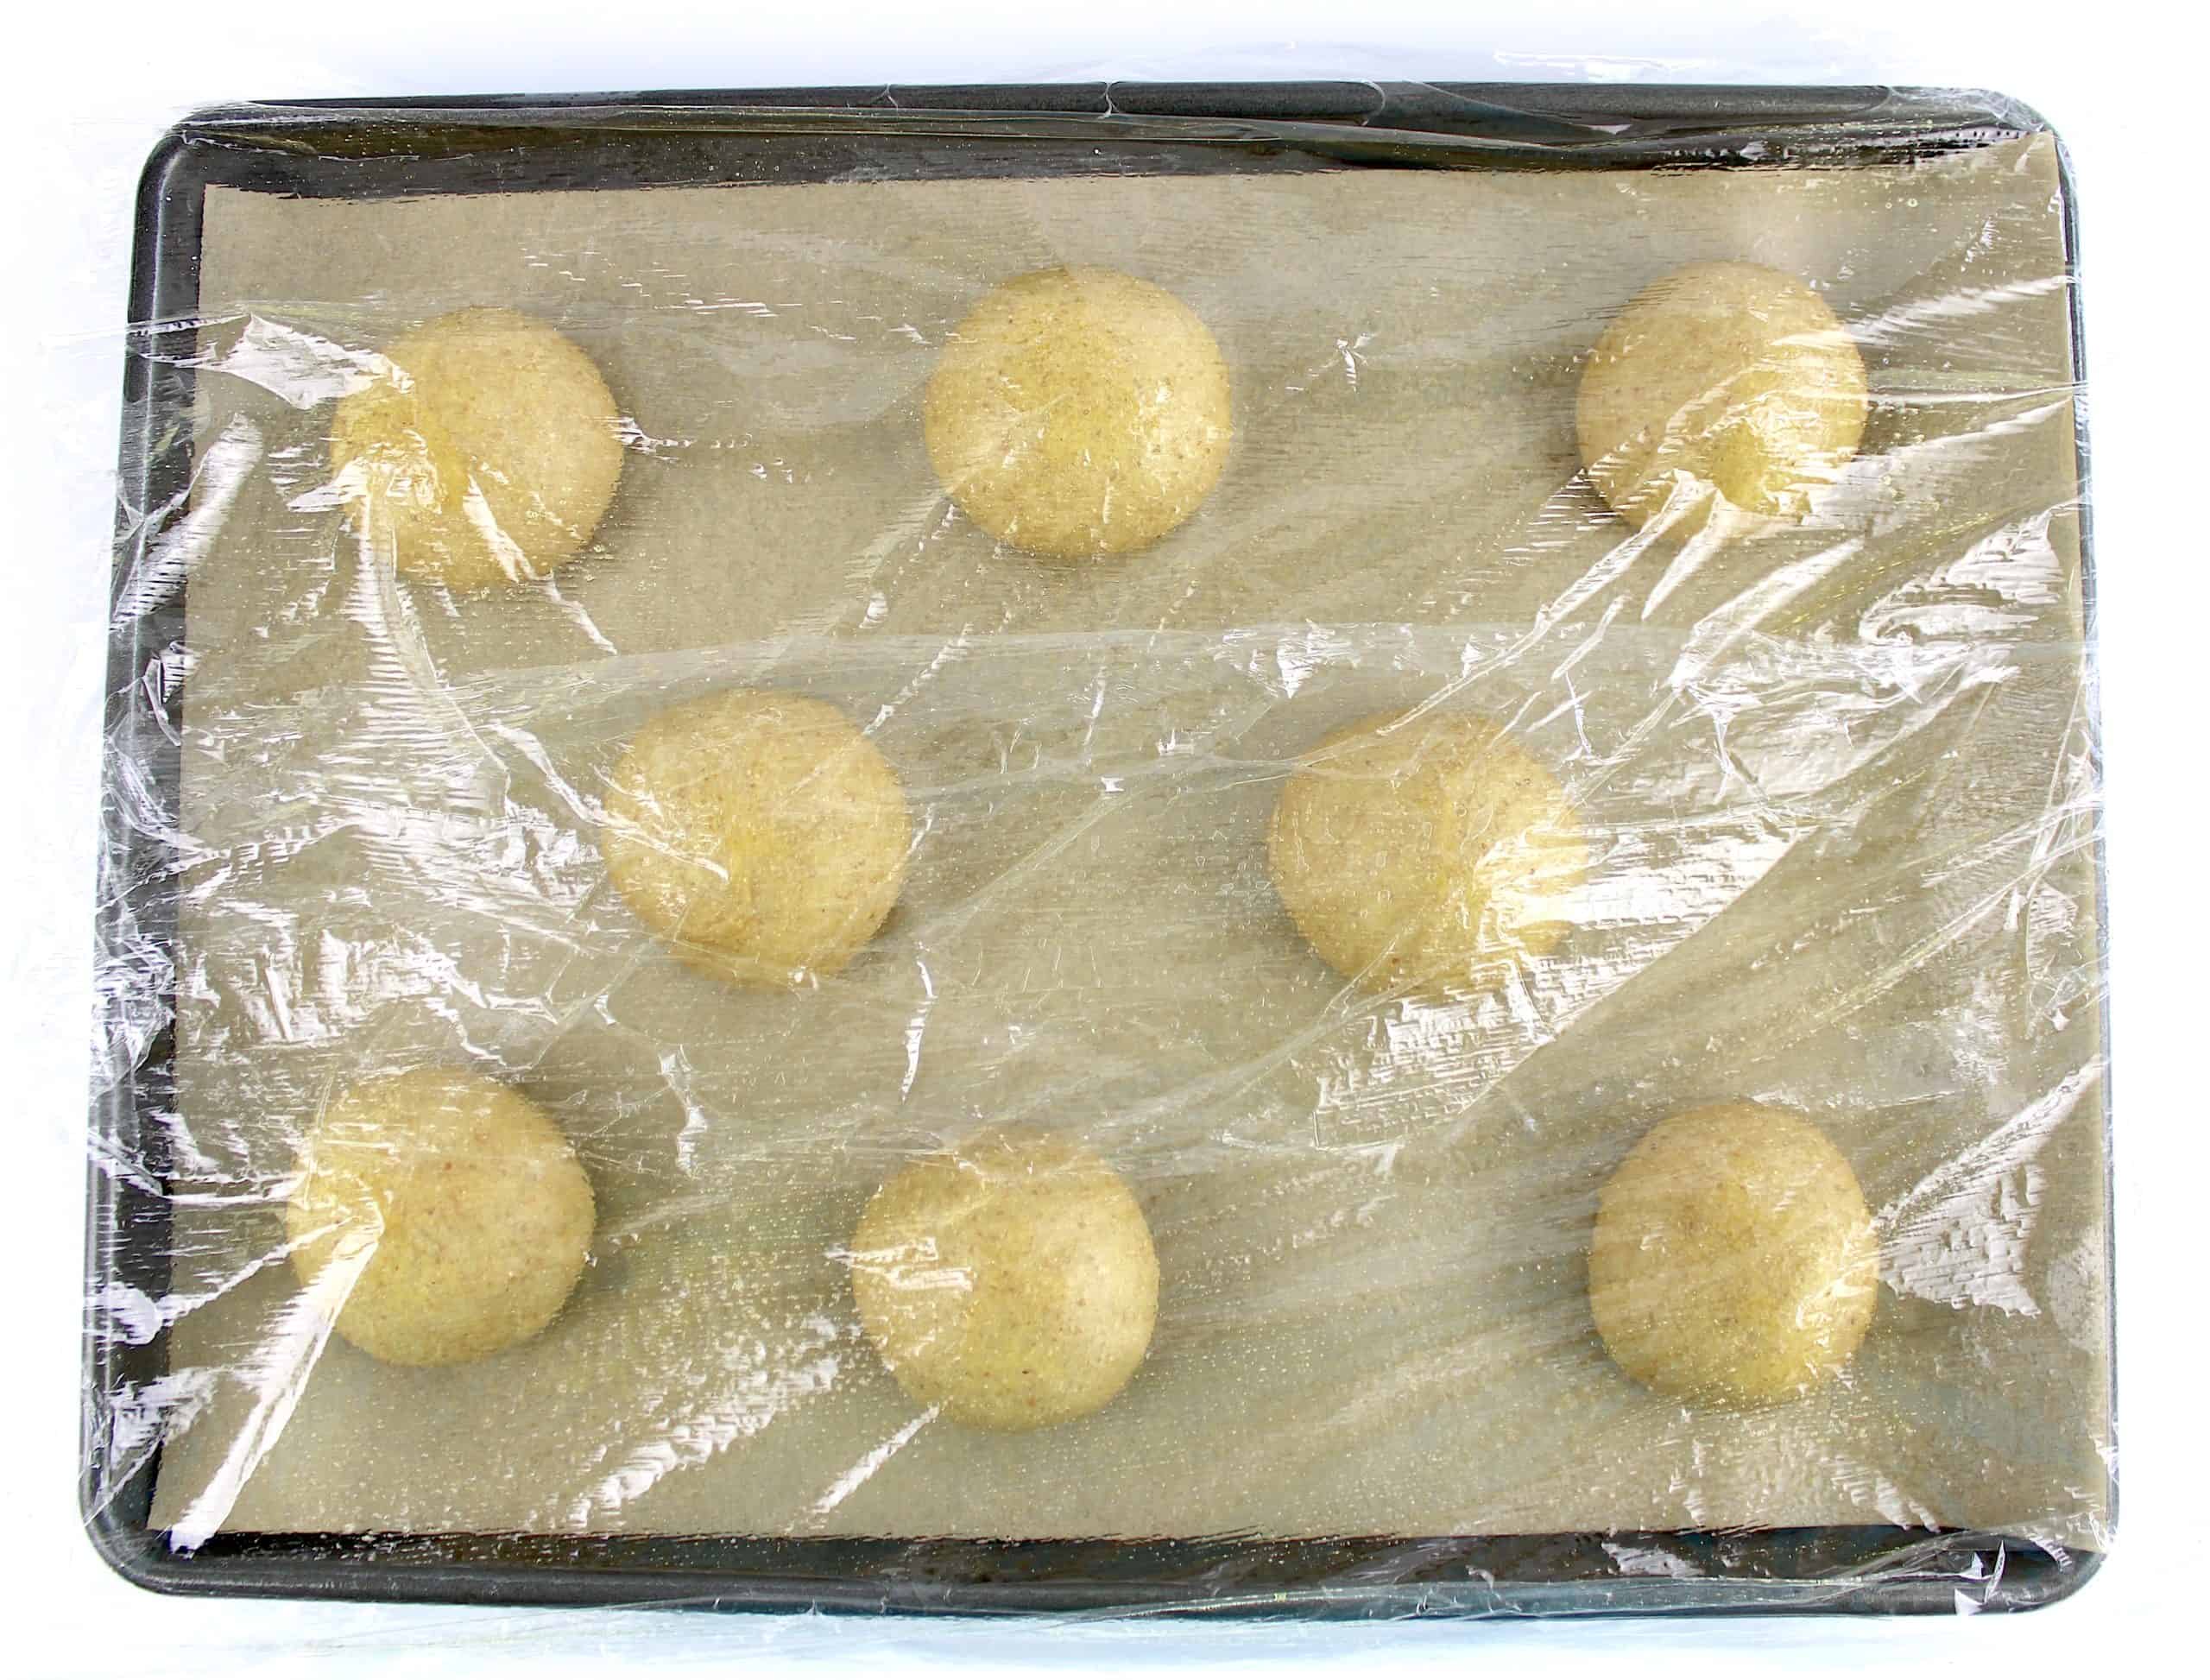 8 keto bun dough balls on parchment lined baking sheet with plastic wrap on top